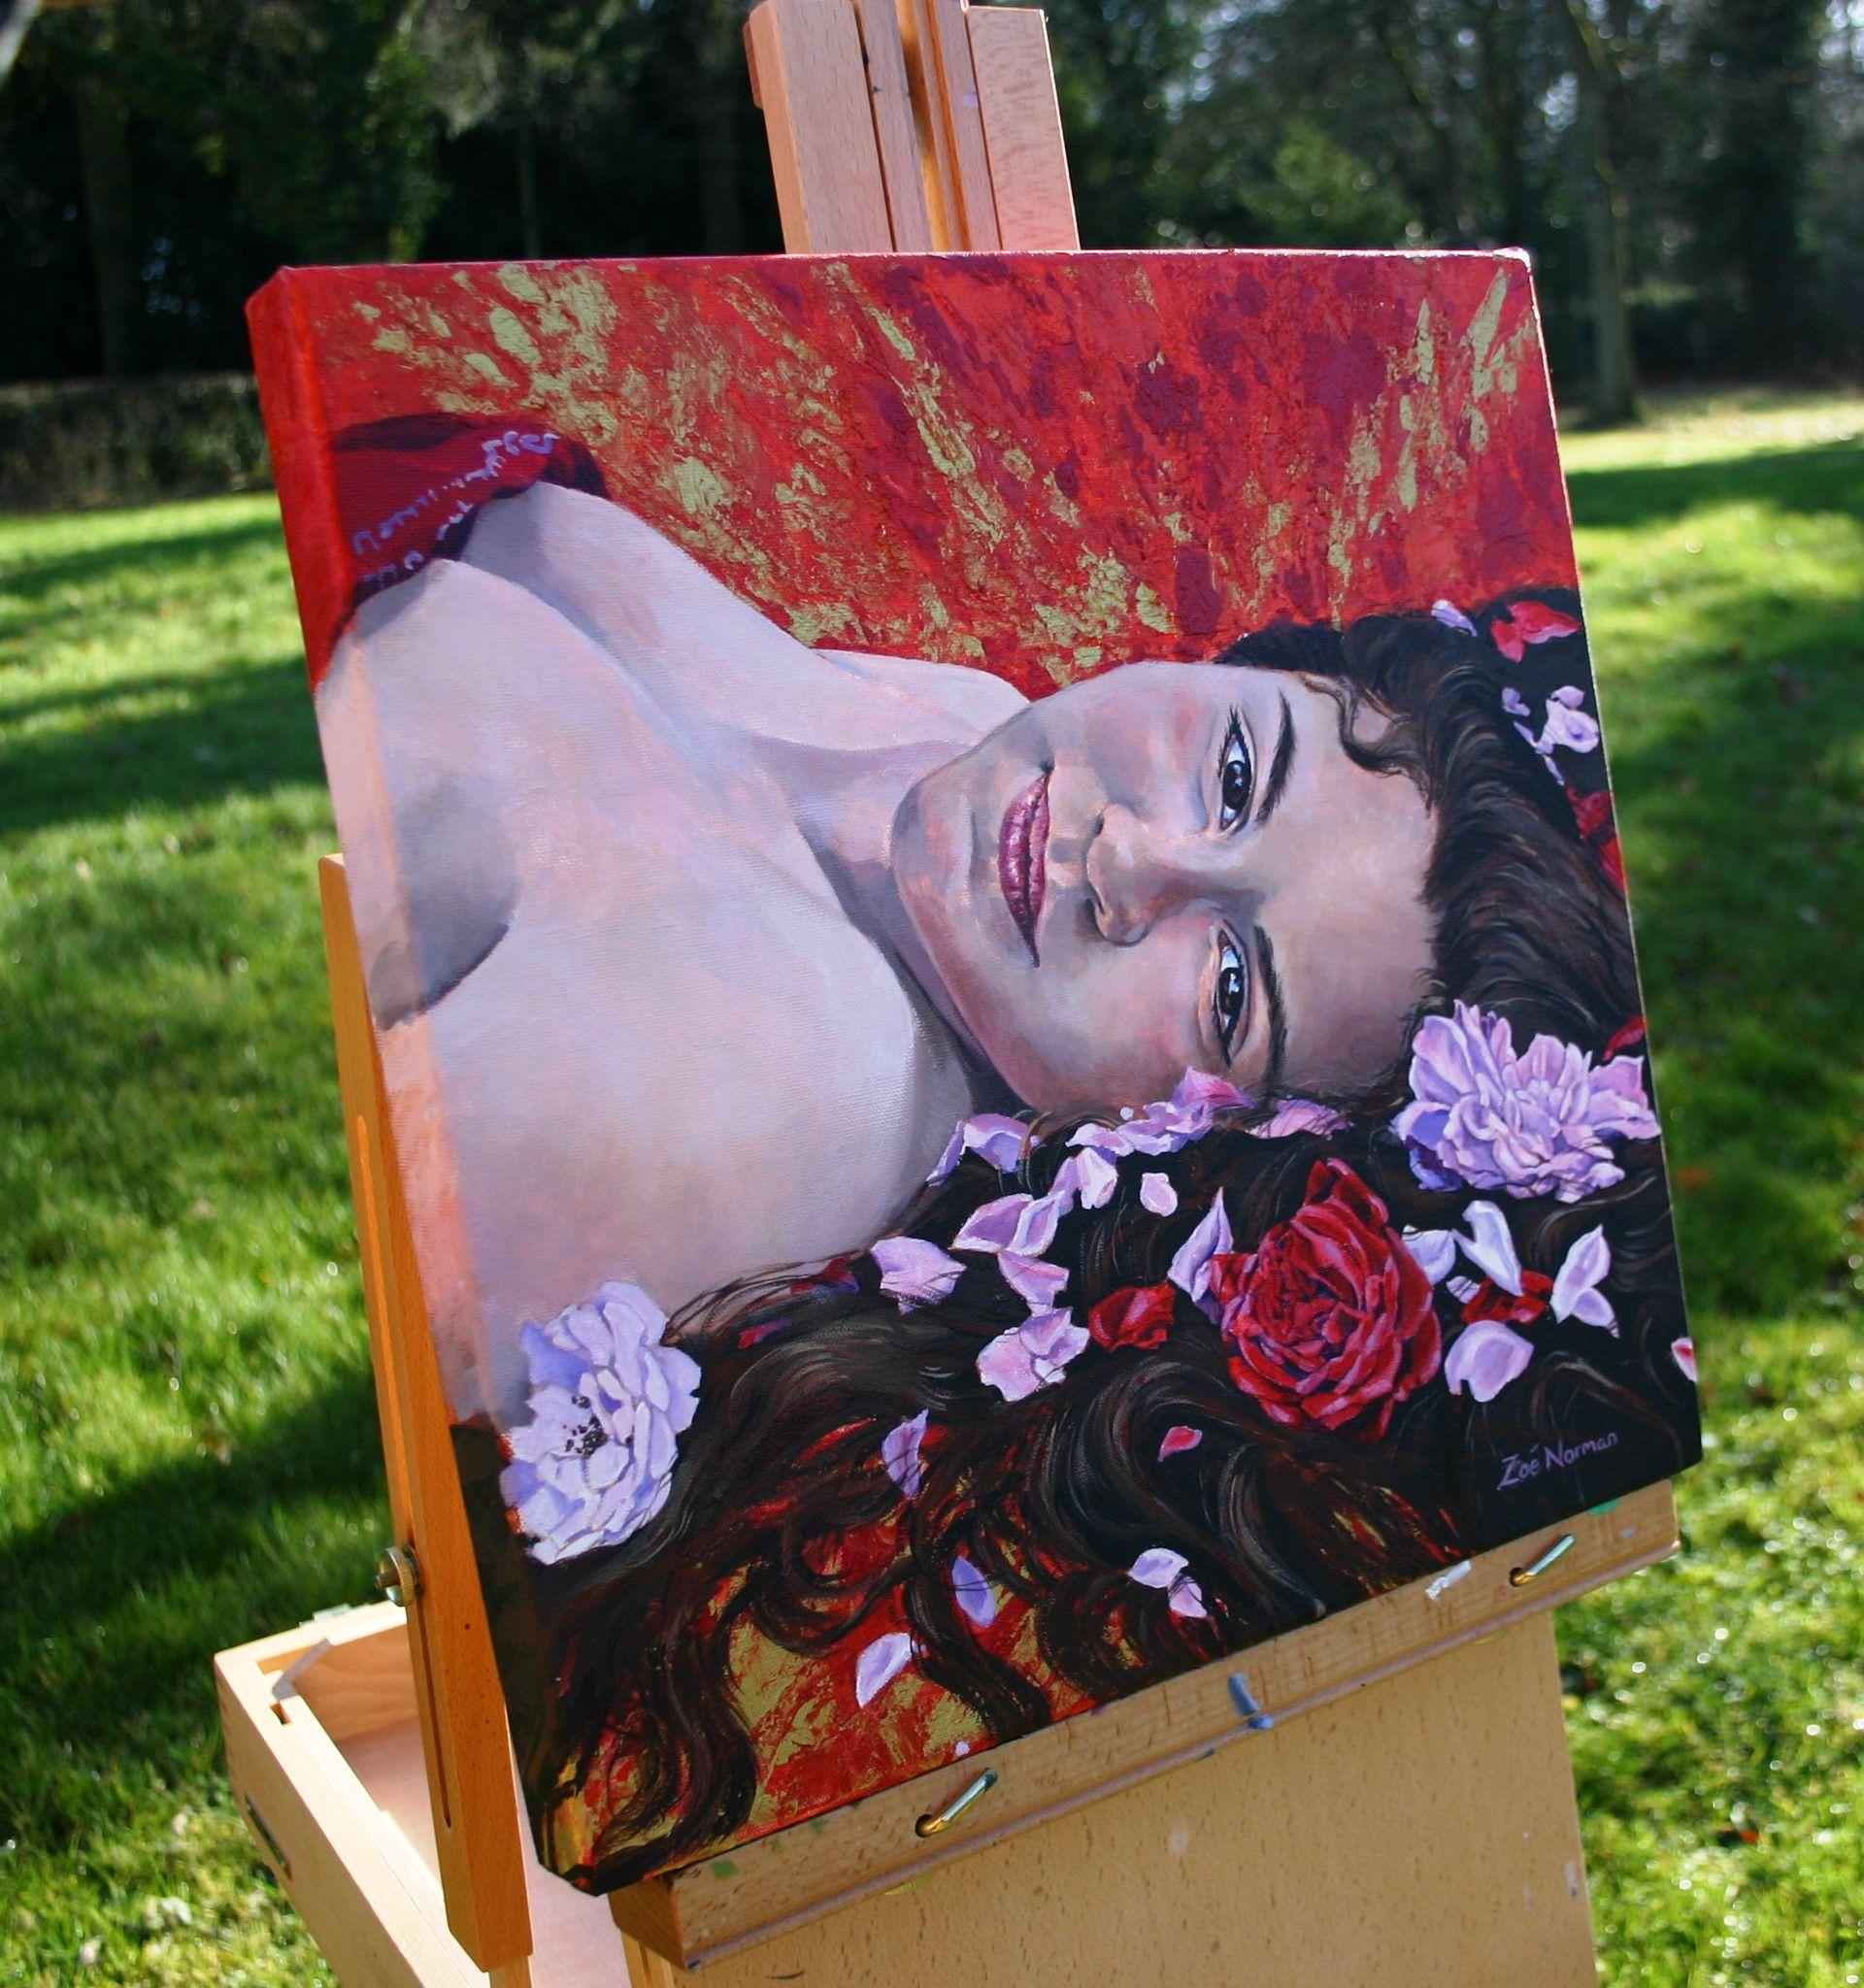 Modern Contemporary Realism    Acrylic and gold painting on stretched cotton canvas. Reclining young woman laying among rose petals. I was inspired by the Pre-Raphaelite paintings and chose a contemplative but intimate pose to capture the youth and